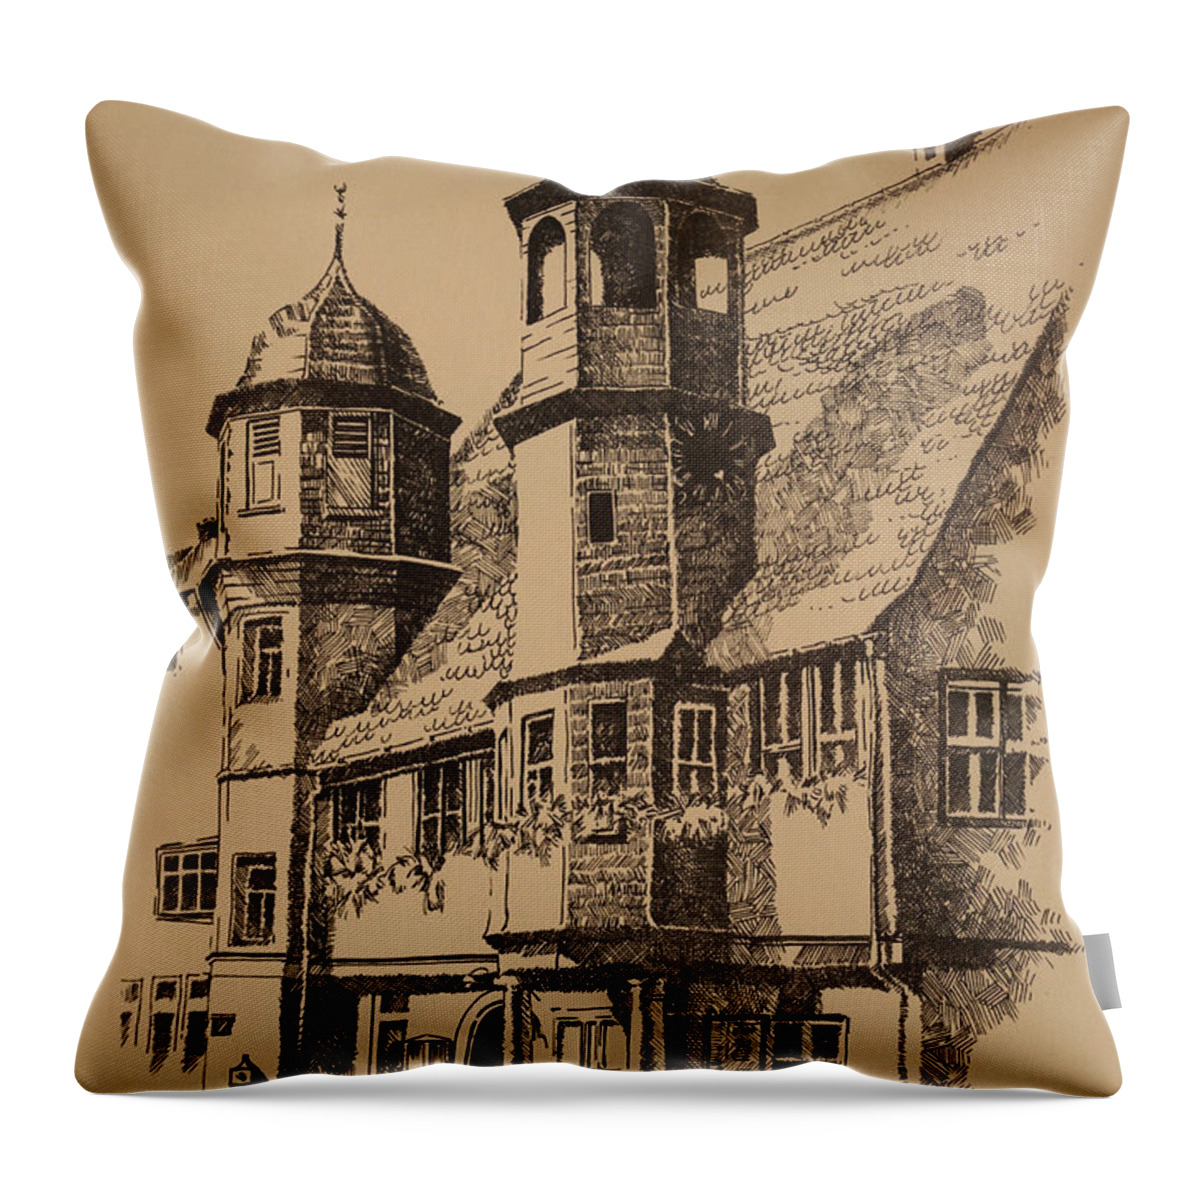 Rathaus Throw Pillow featuring the drawing Rathaus by Michael Lang